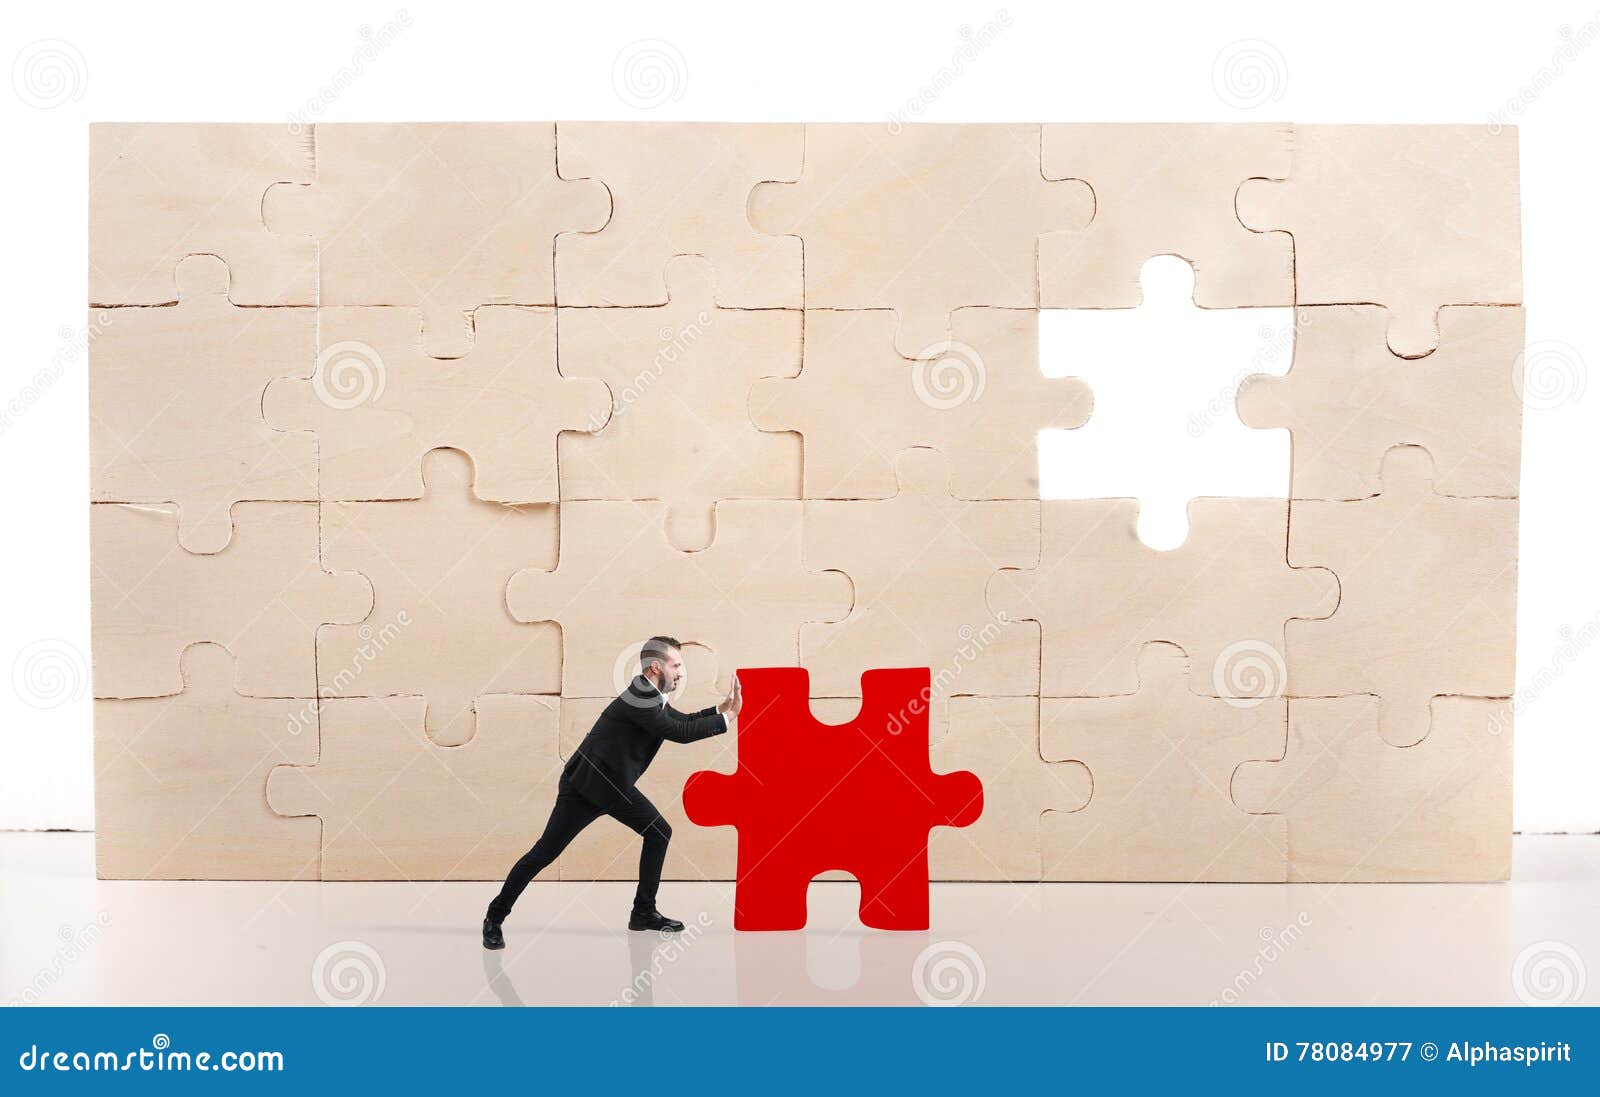 Complete a Puzzle with Missing Piece Stock Image - Image of connect